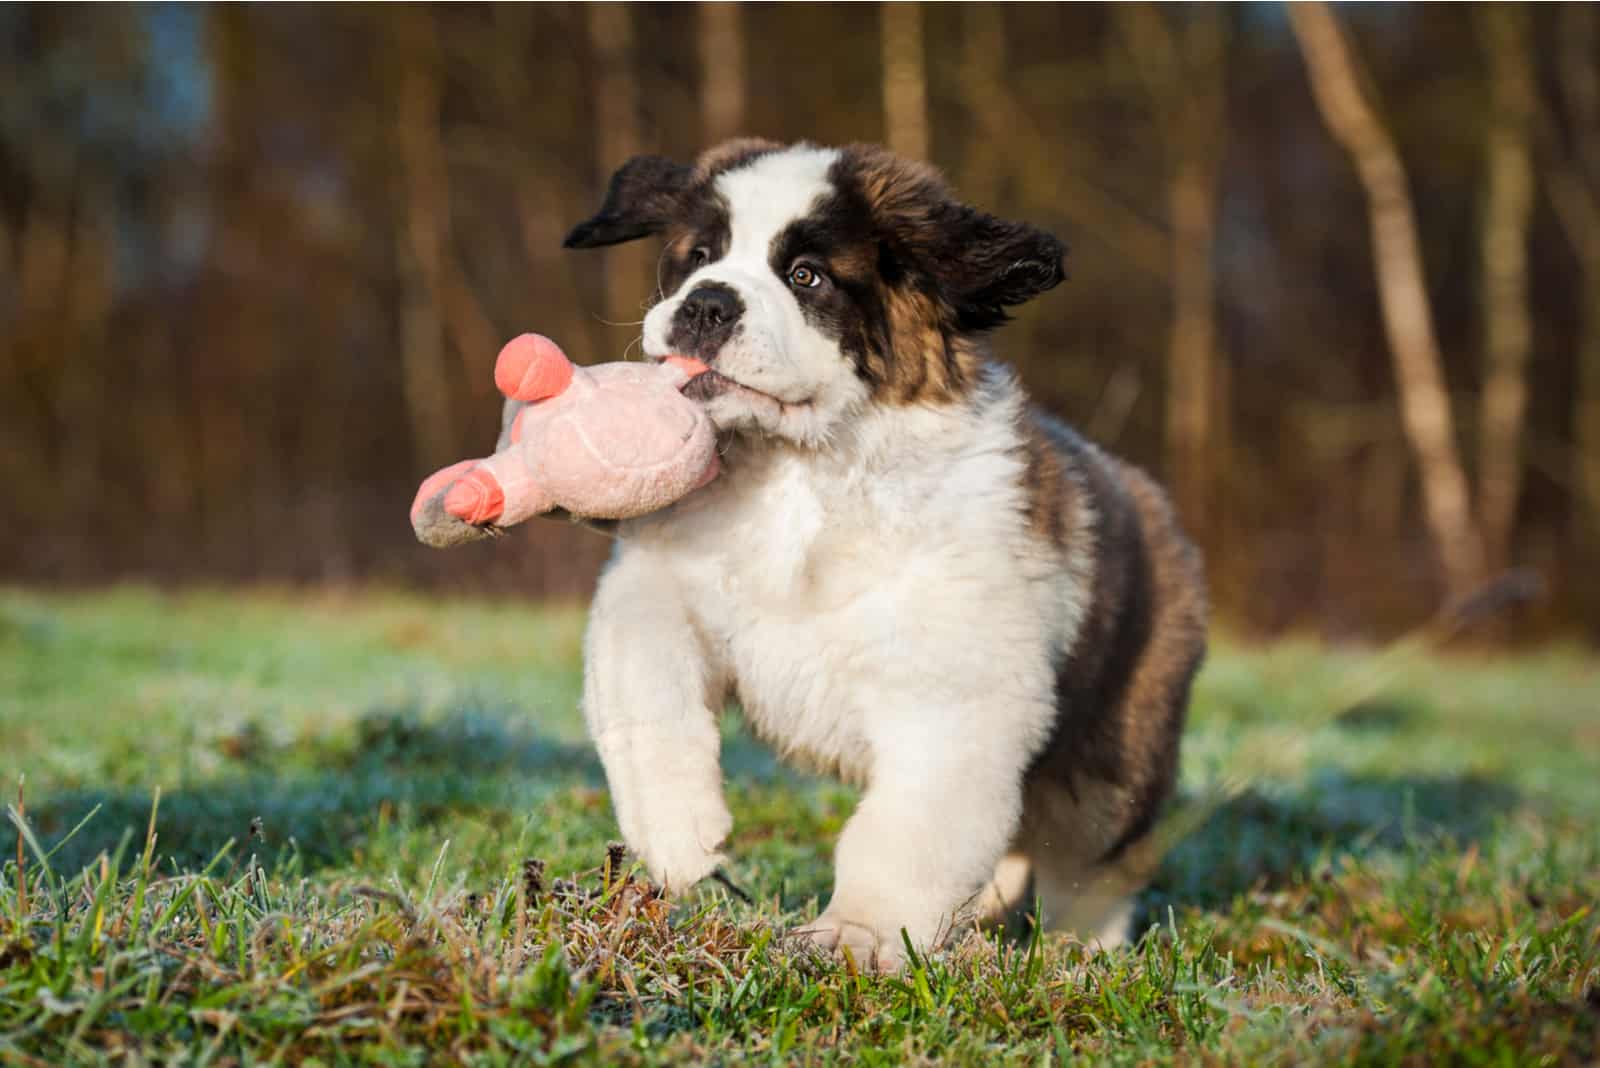 Saint Bernard Puppy playing with toy